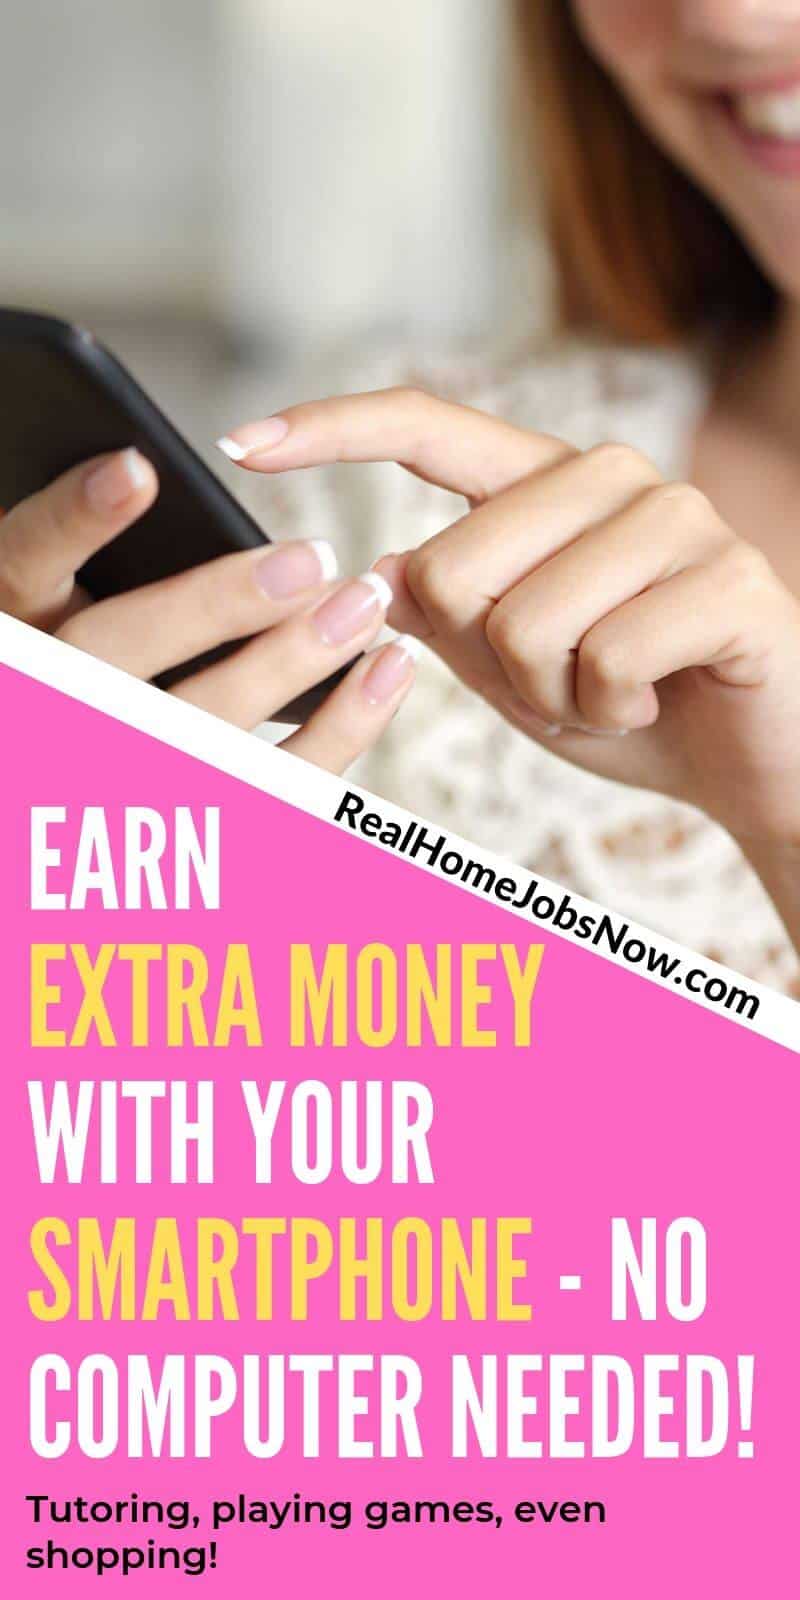 These work from home smartphone jobs are easy and flexible!  You can make quick, extra money with no computer and no set schedule. These opportunities are perfect for beginners or anyone who just wants start today earning extra money!